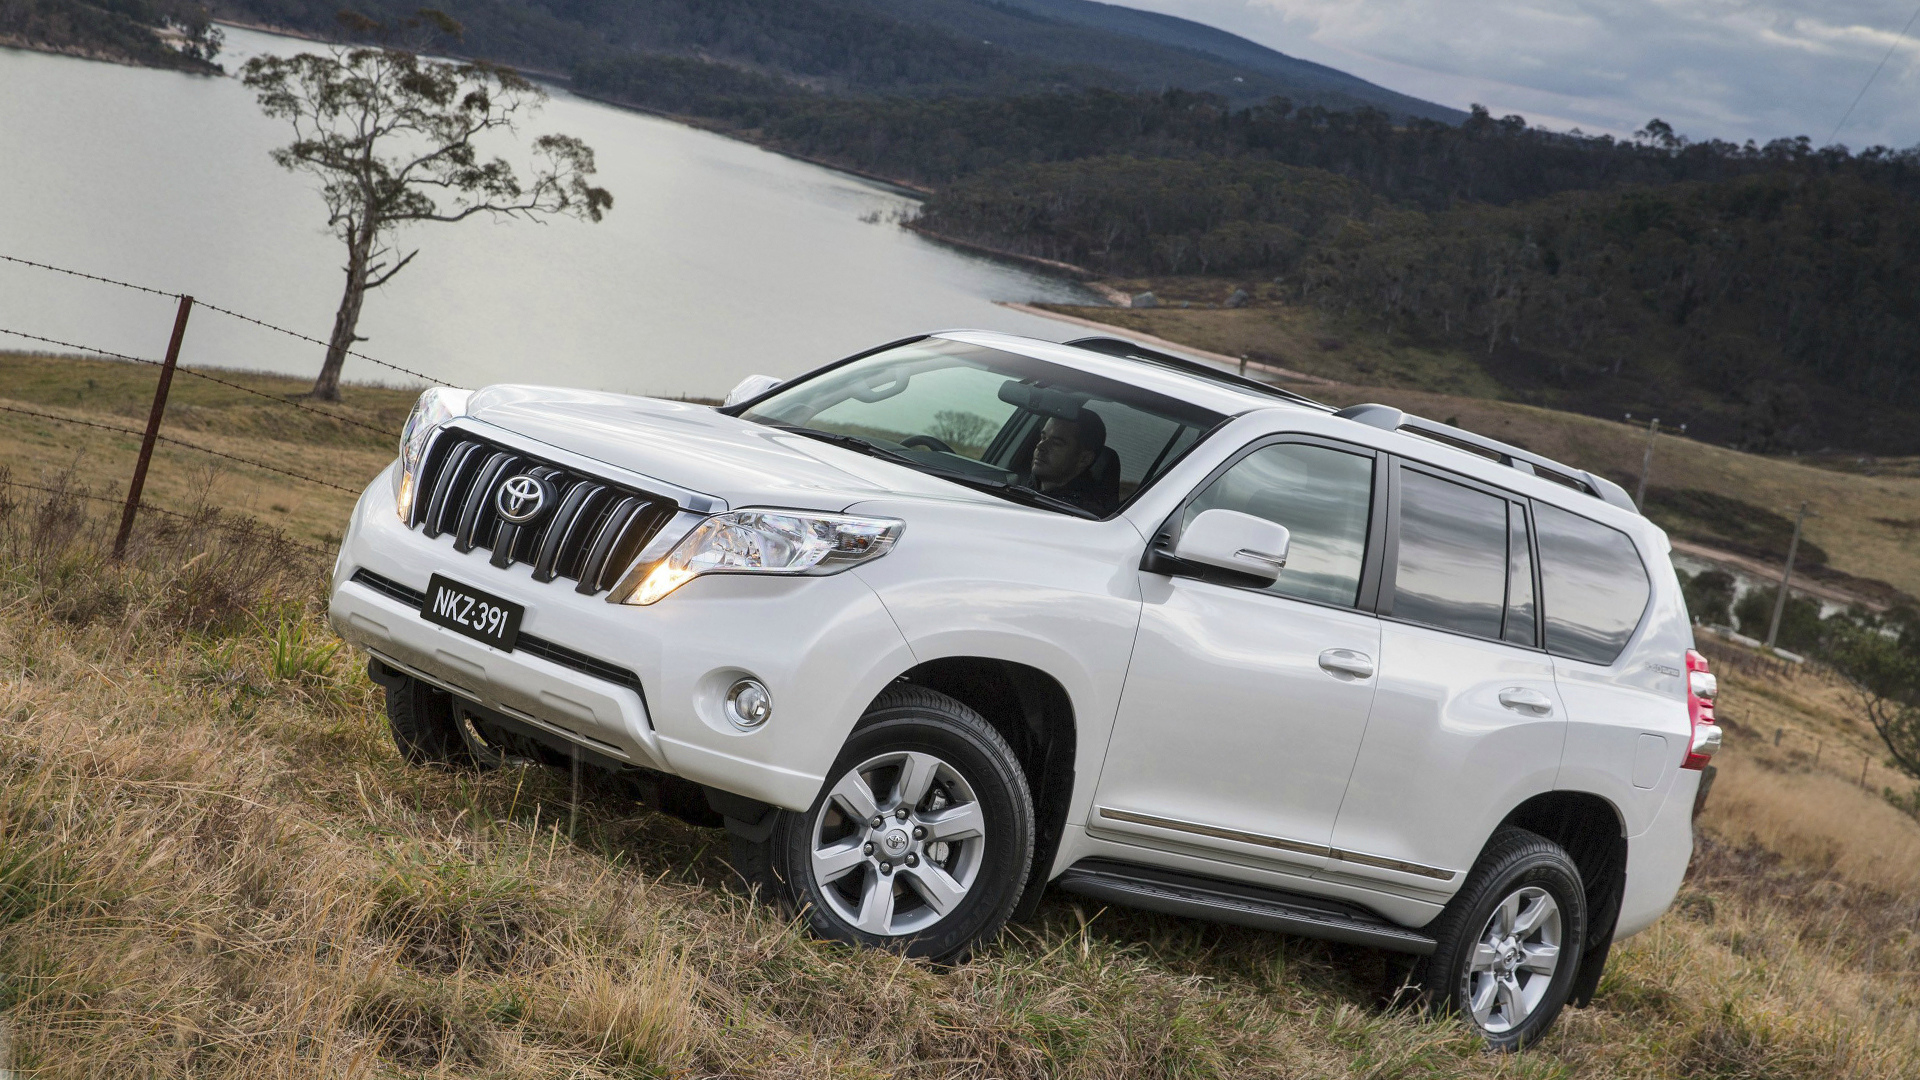 Check out our newest limited offer - Toyota Prado 2.7 Petrol - GAT